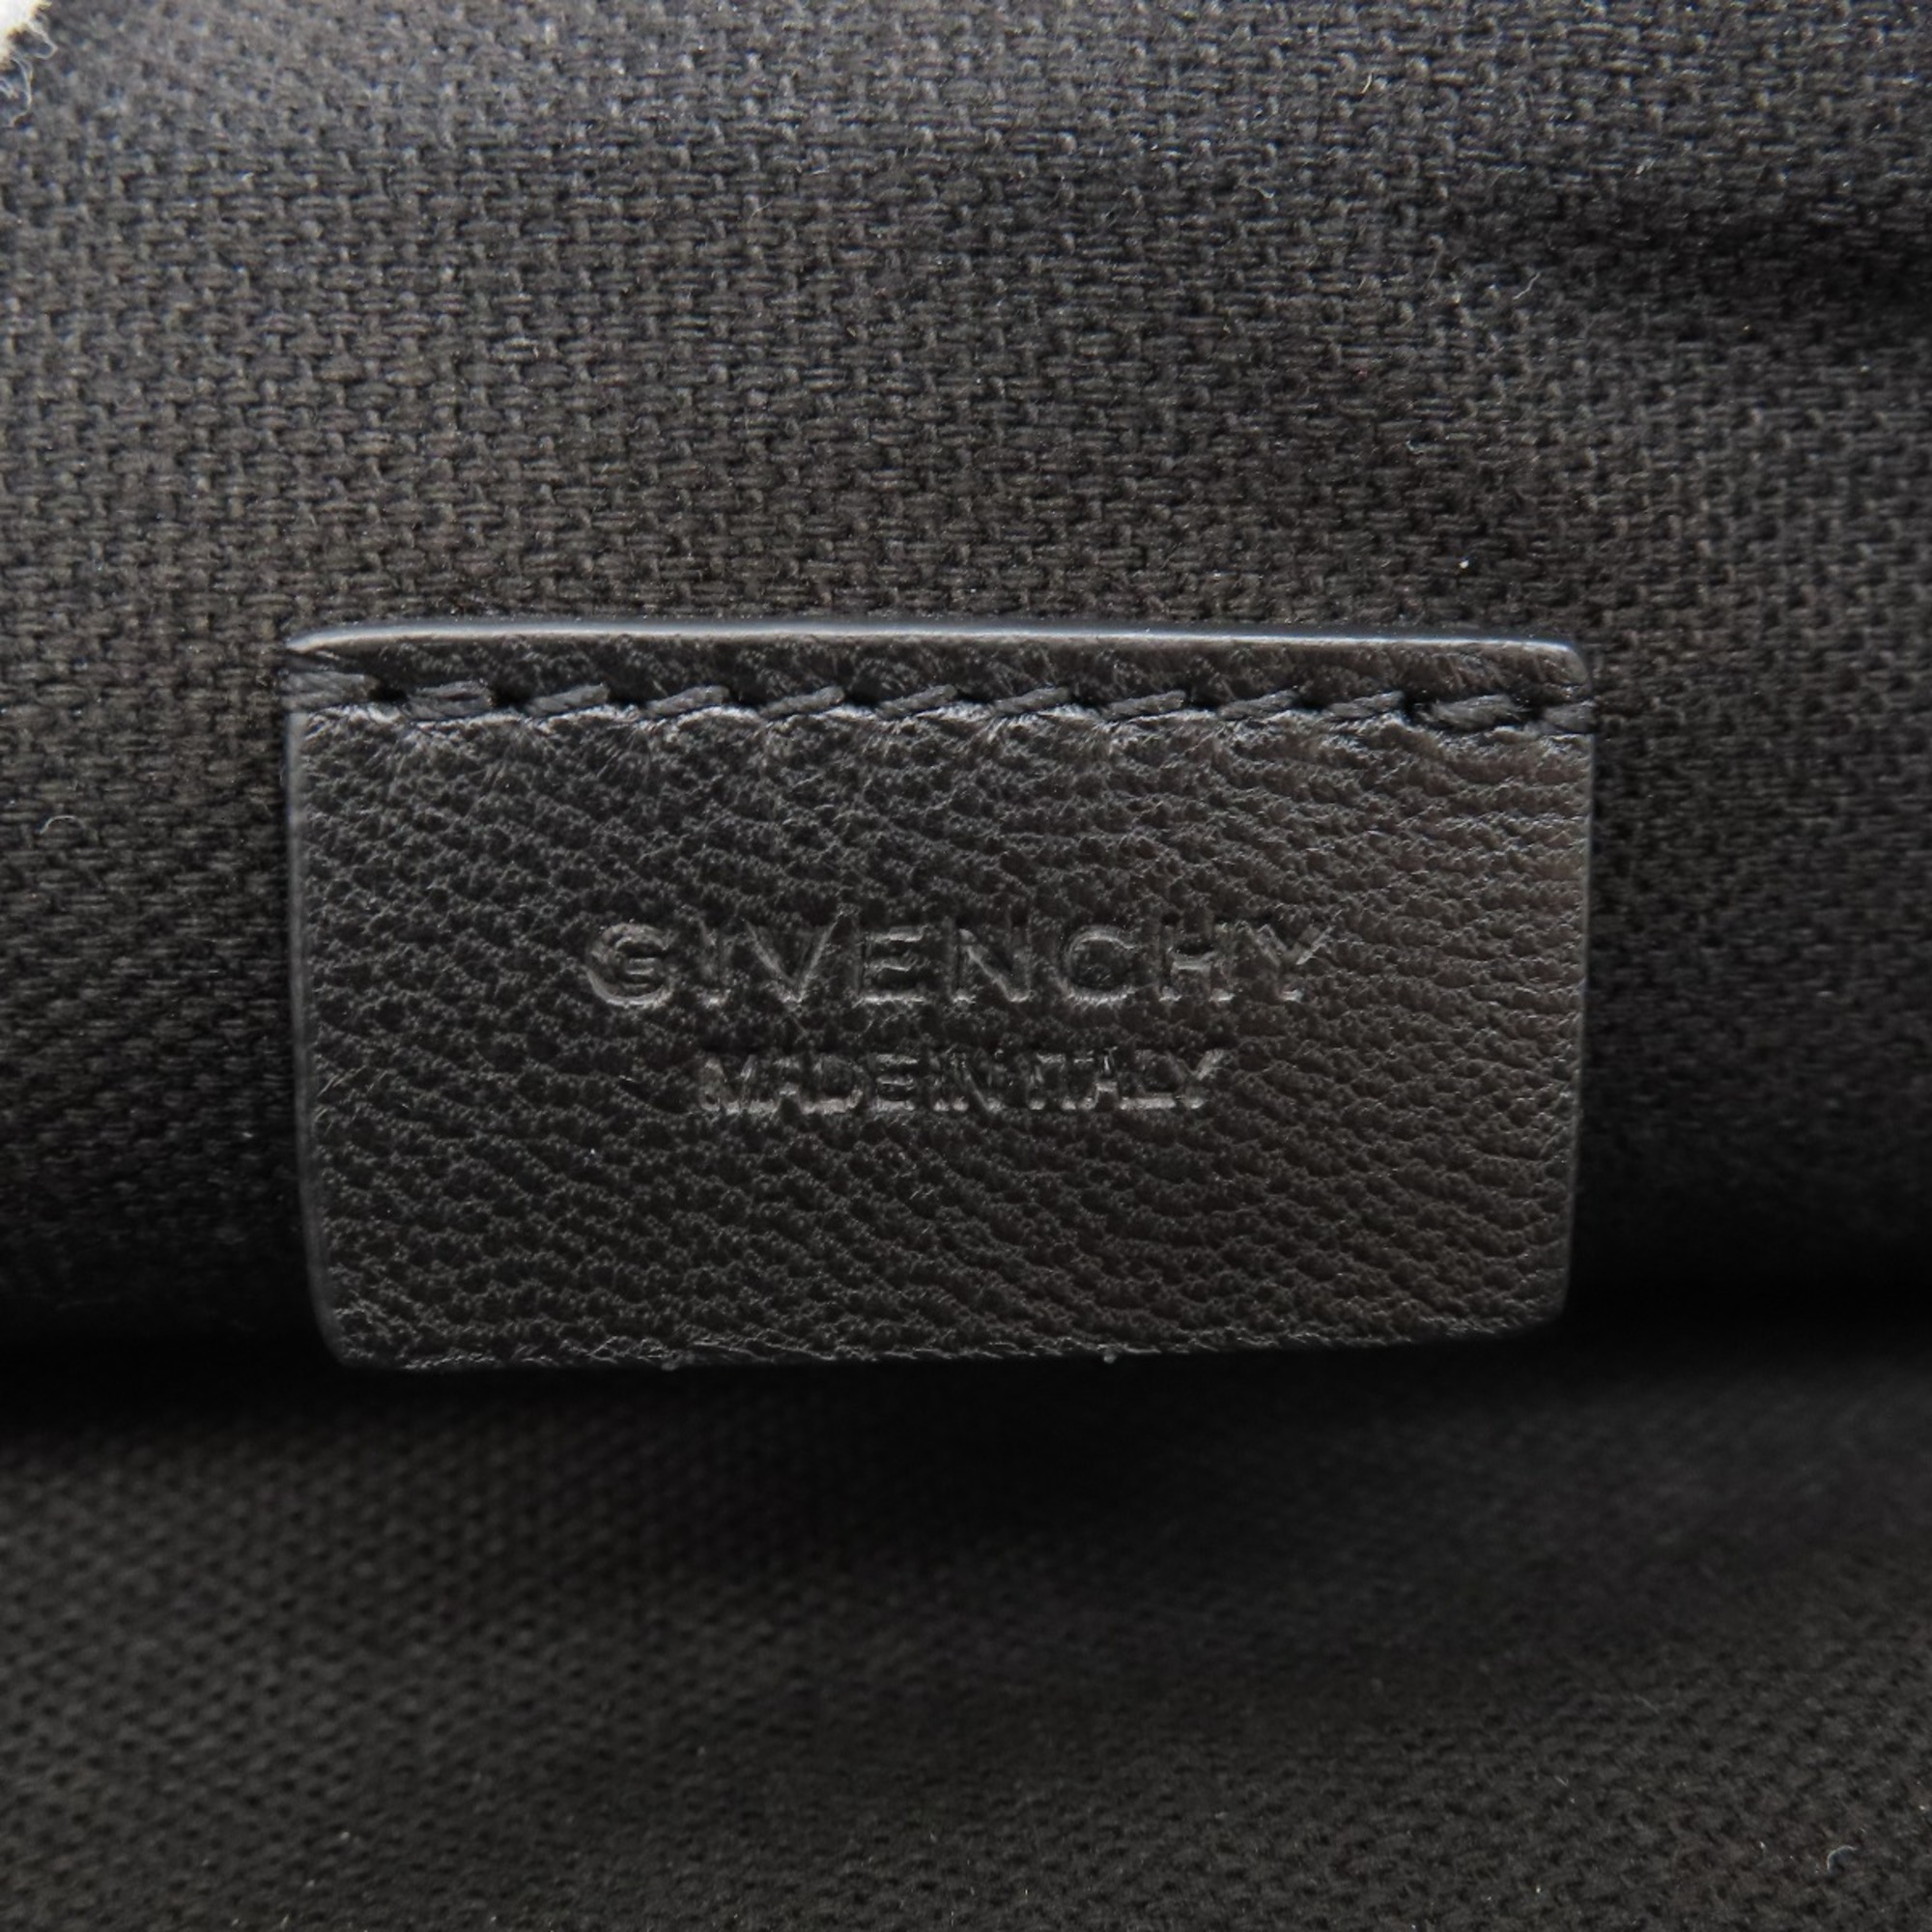 Givenchy metal polka dot pouch for men and women